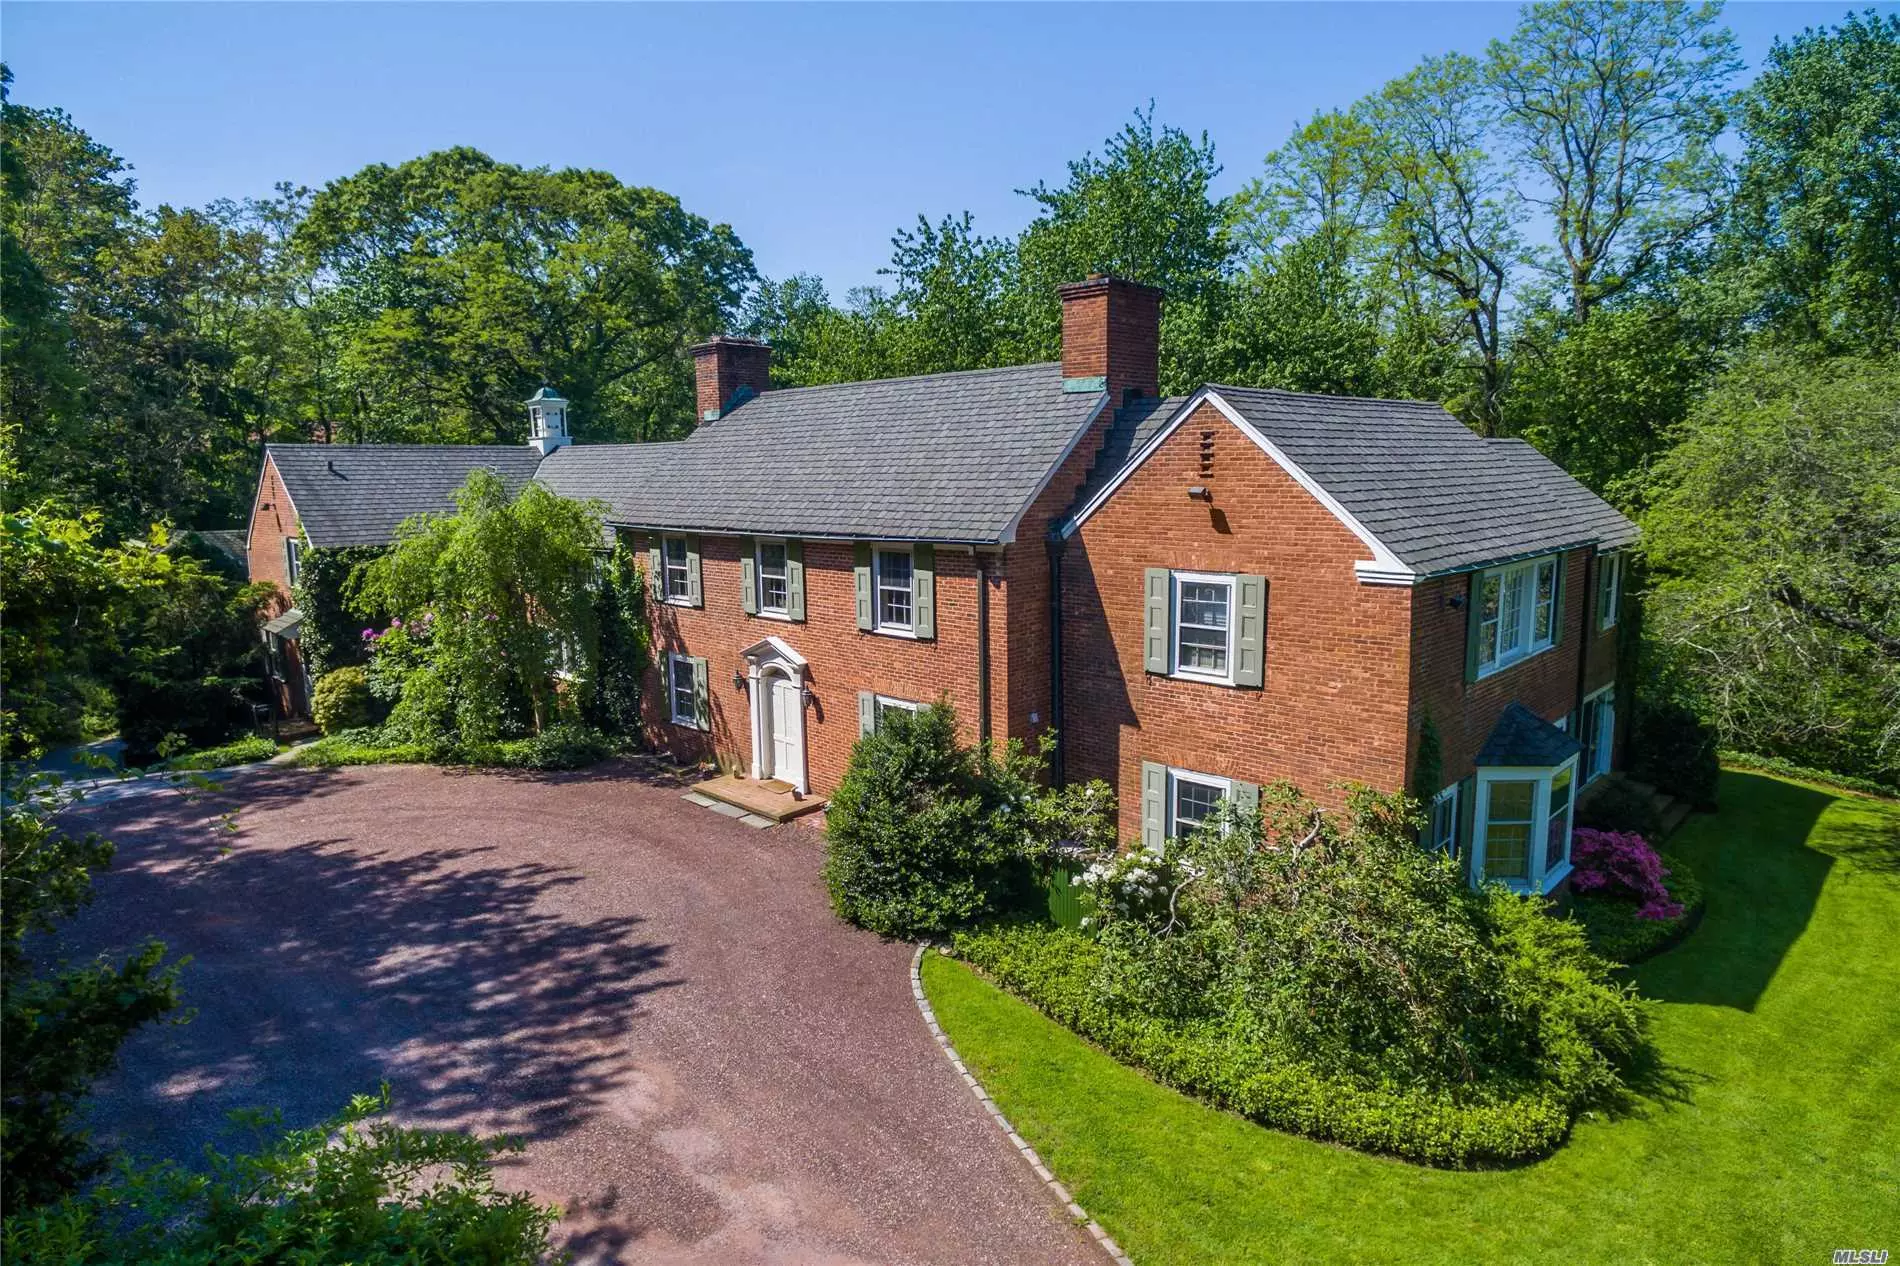 Are you looking for total privacy on a Private Road surrounded by your own 5 plus acres of lawns and towering trees in the heart of Mill Neck? Built in 1929 as a summer home and lovingly updated thru the years with many amenities.